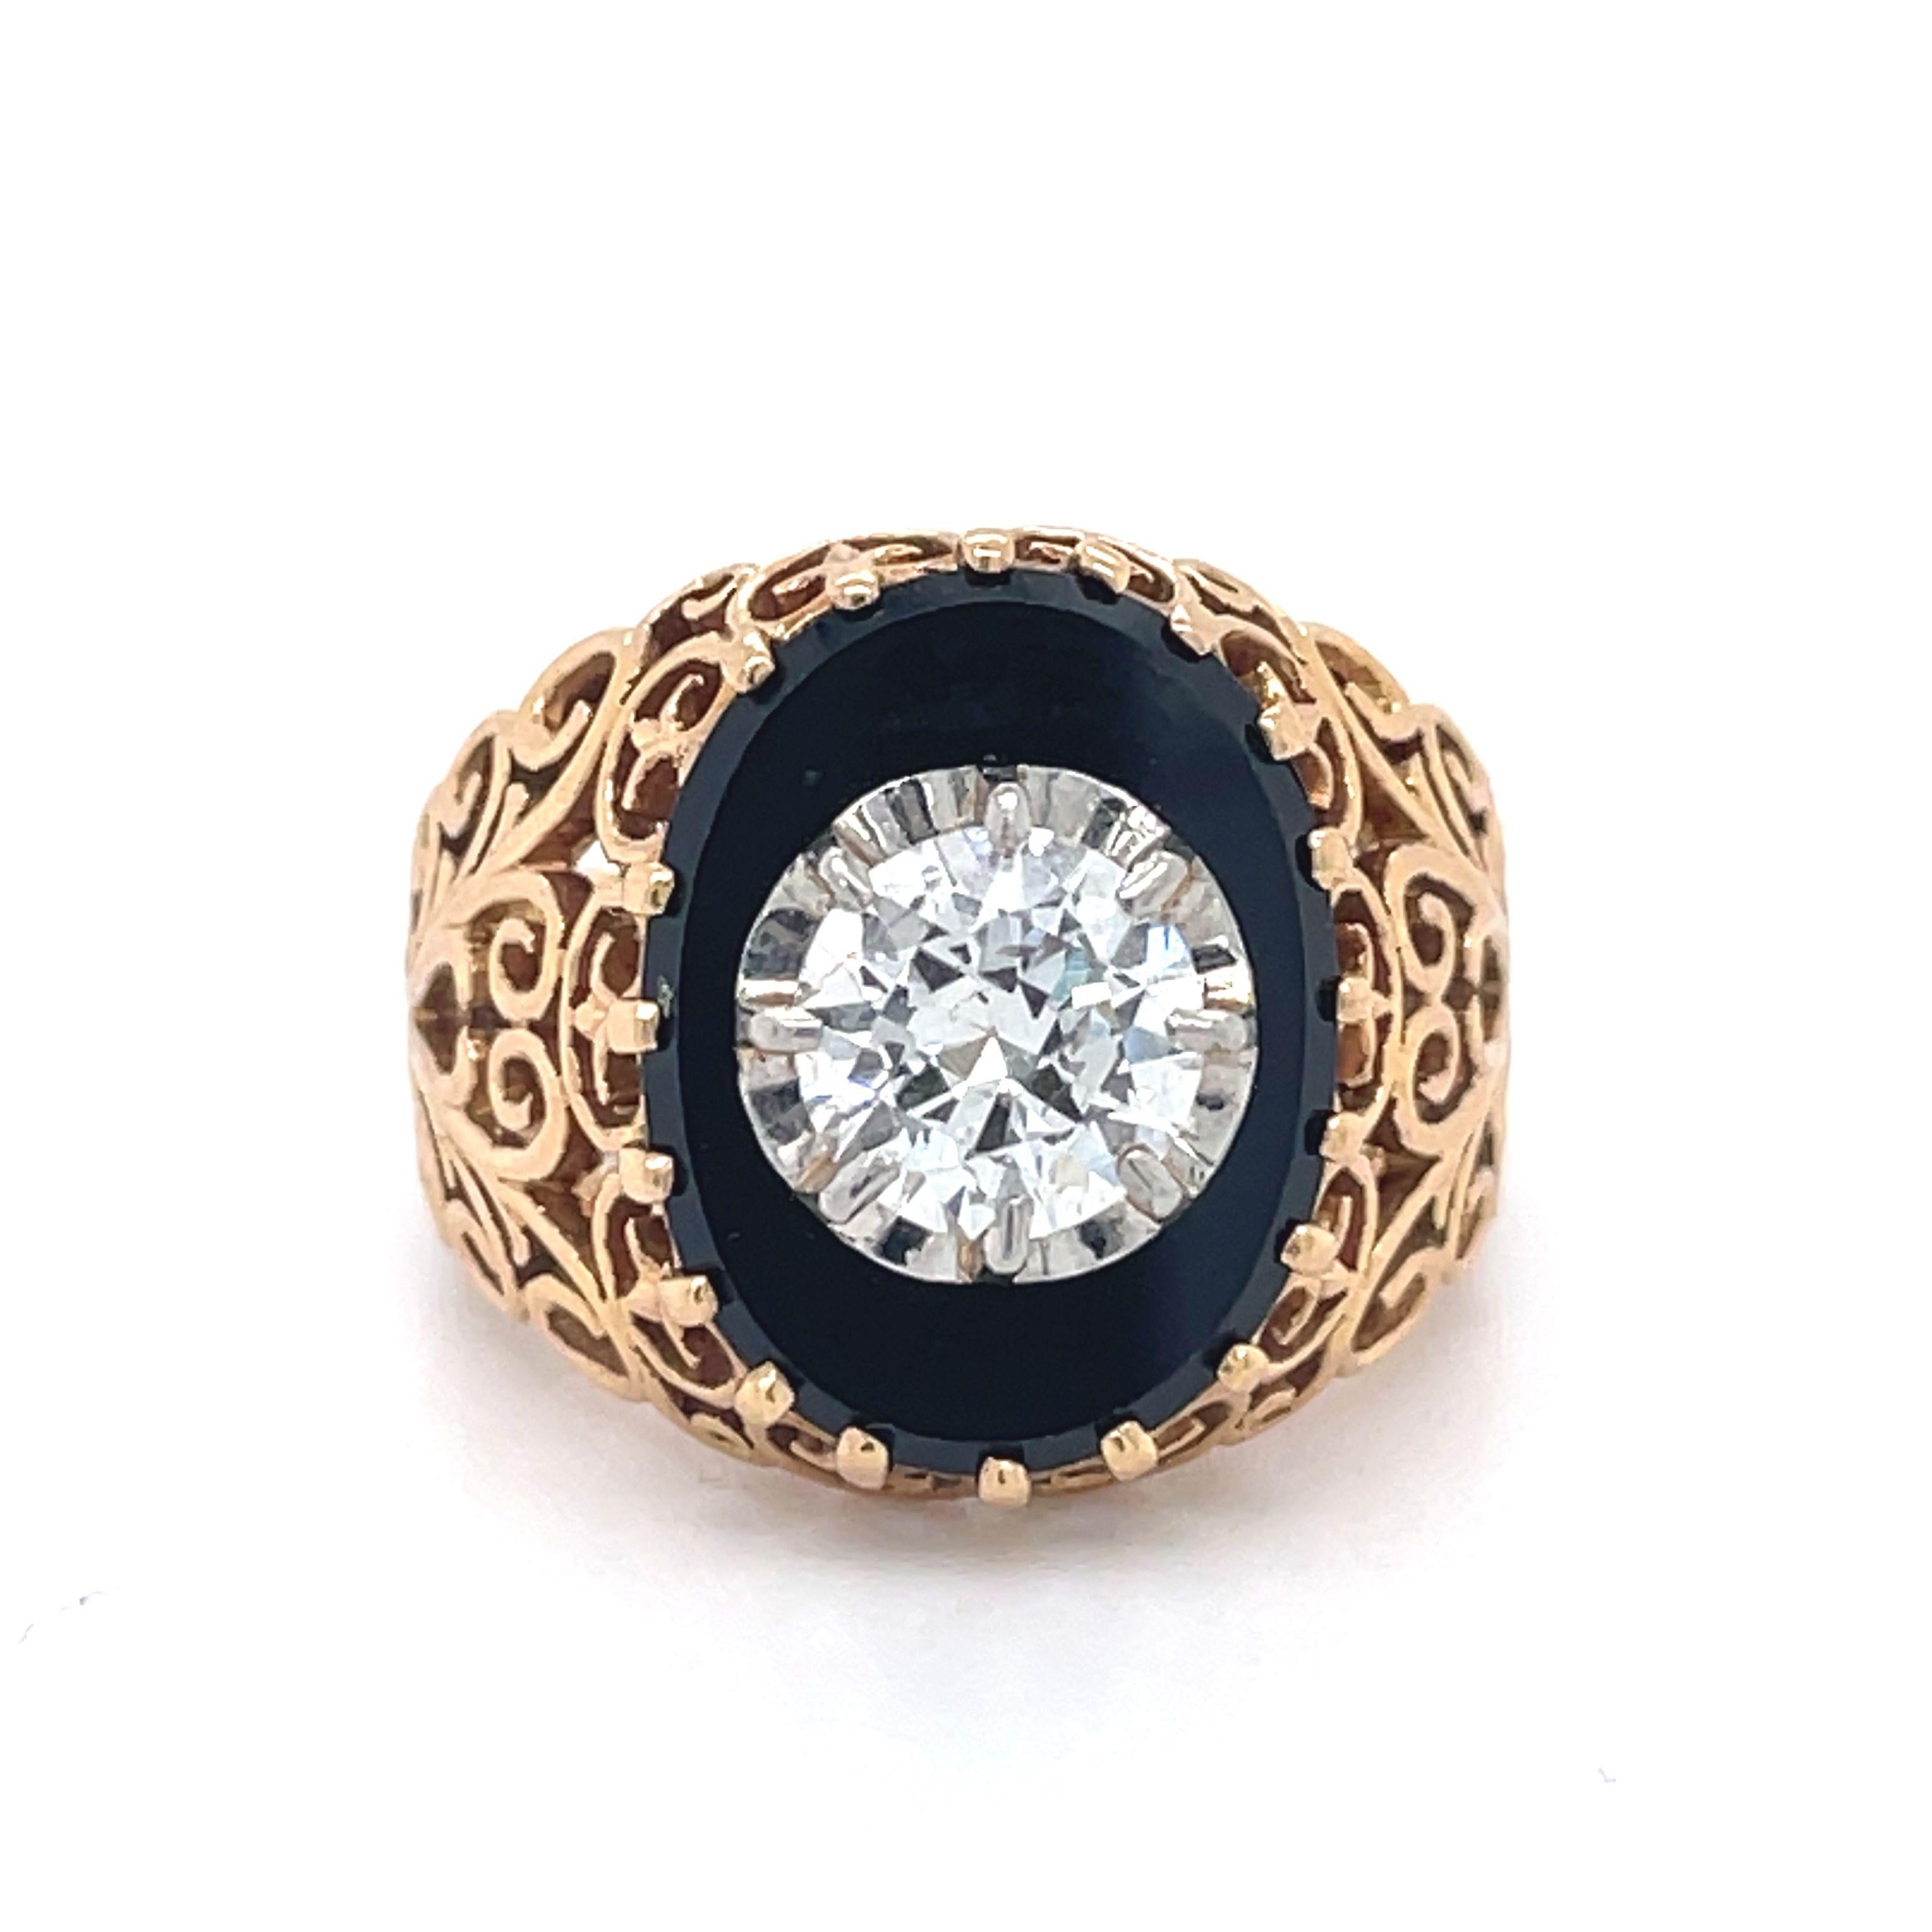 Women's or Men's Filigree Ring- Vintage Onyx and Diamond Ring, 1ct Round Diamond, 18k Yellow Gold For Sale